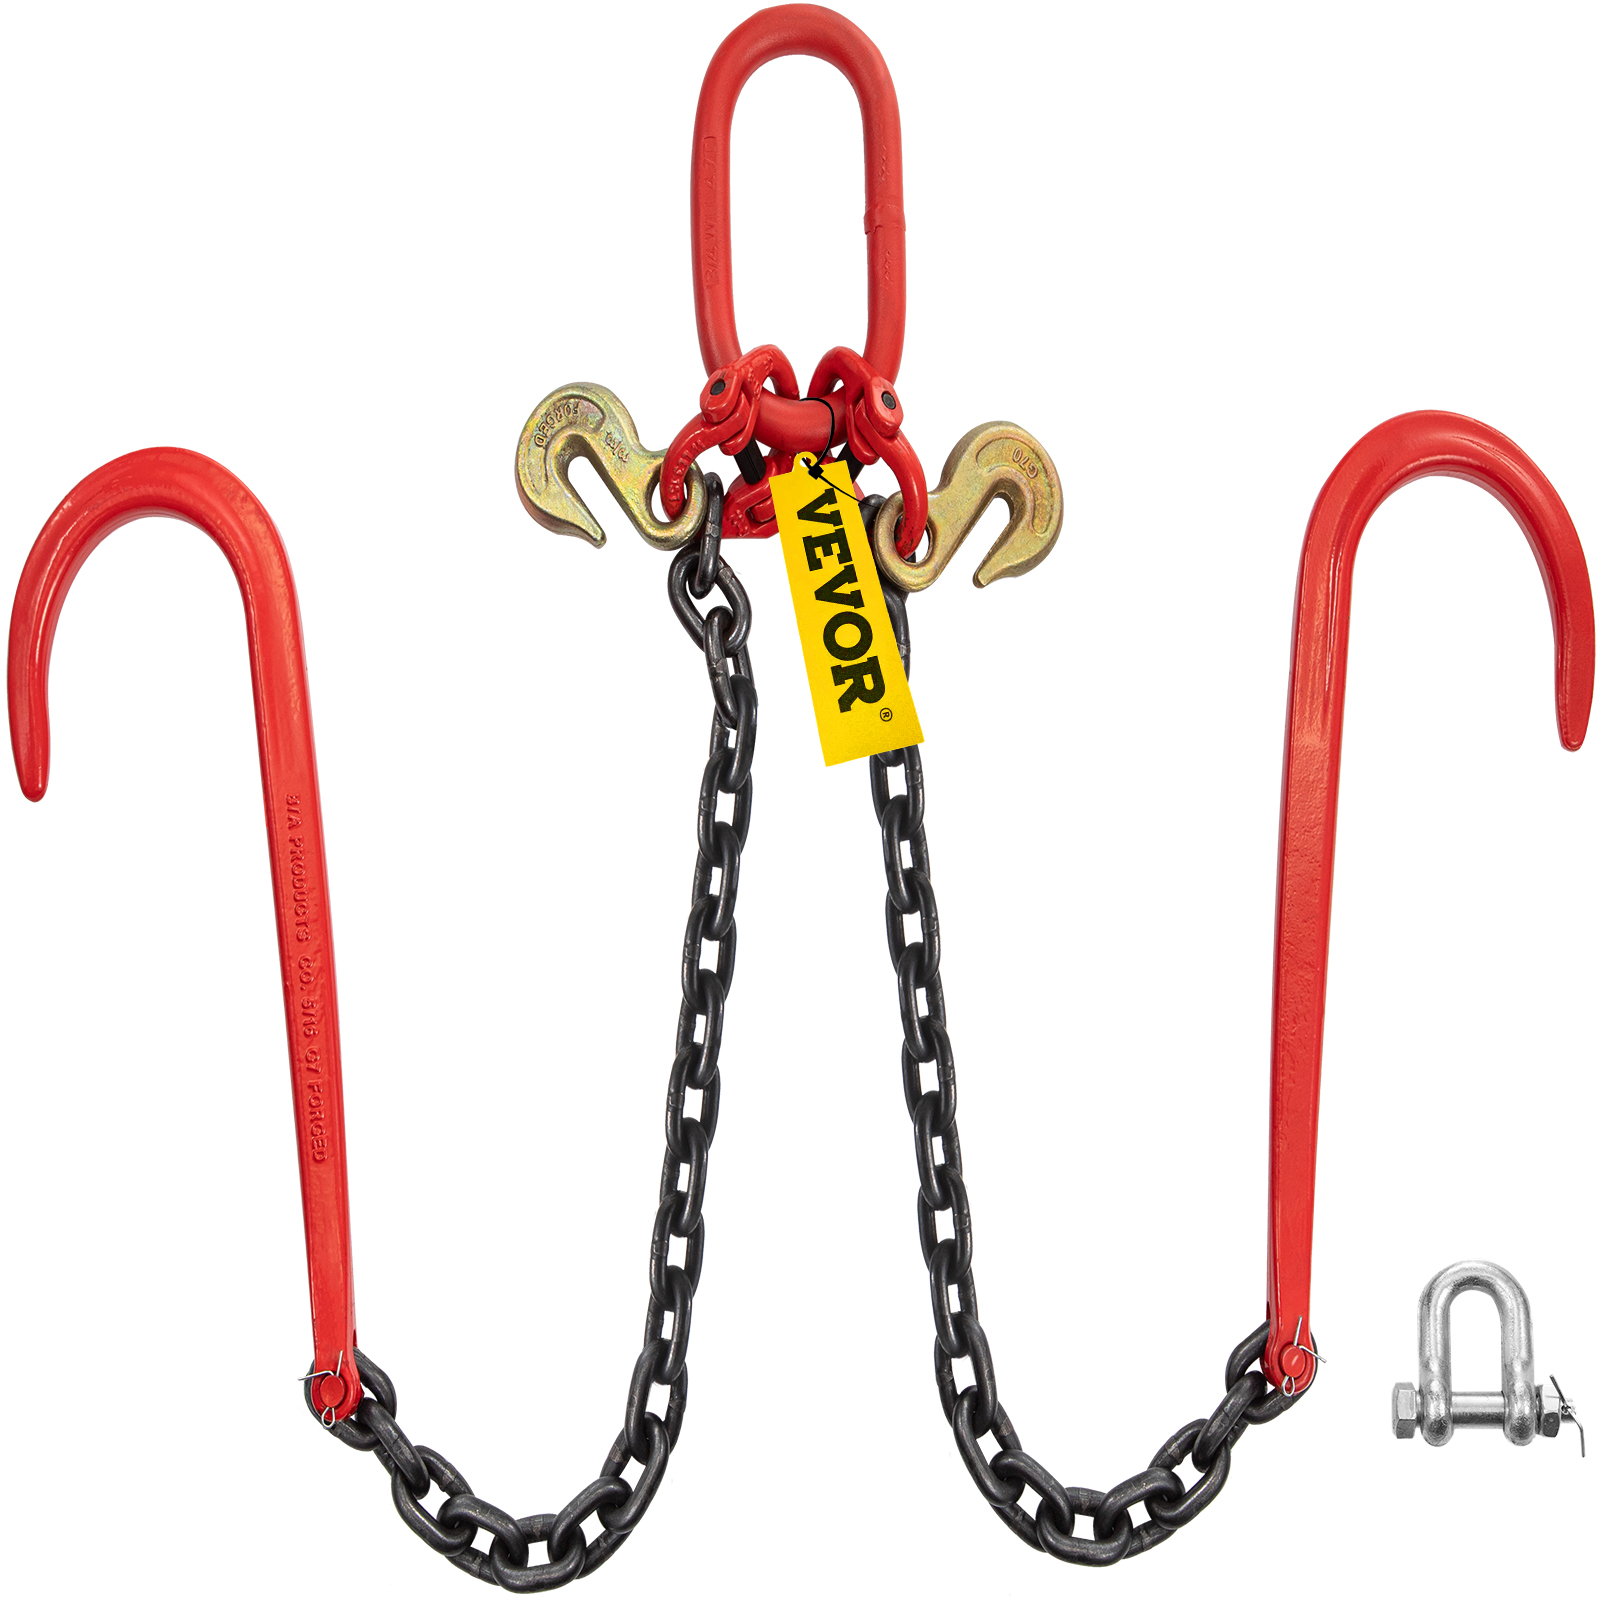 Tow Chain with J Hook and Grab Hook G70 Forged Towing Bridle